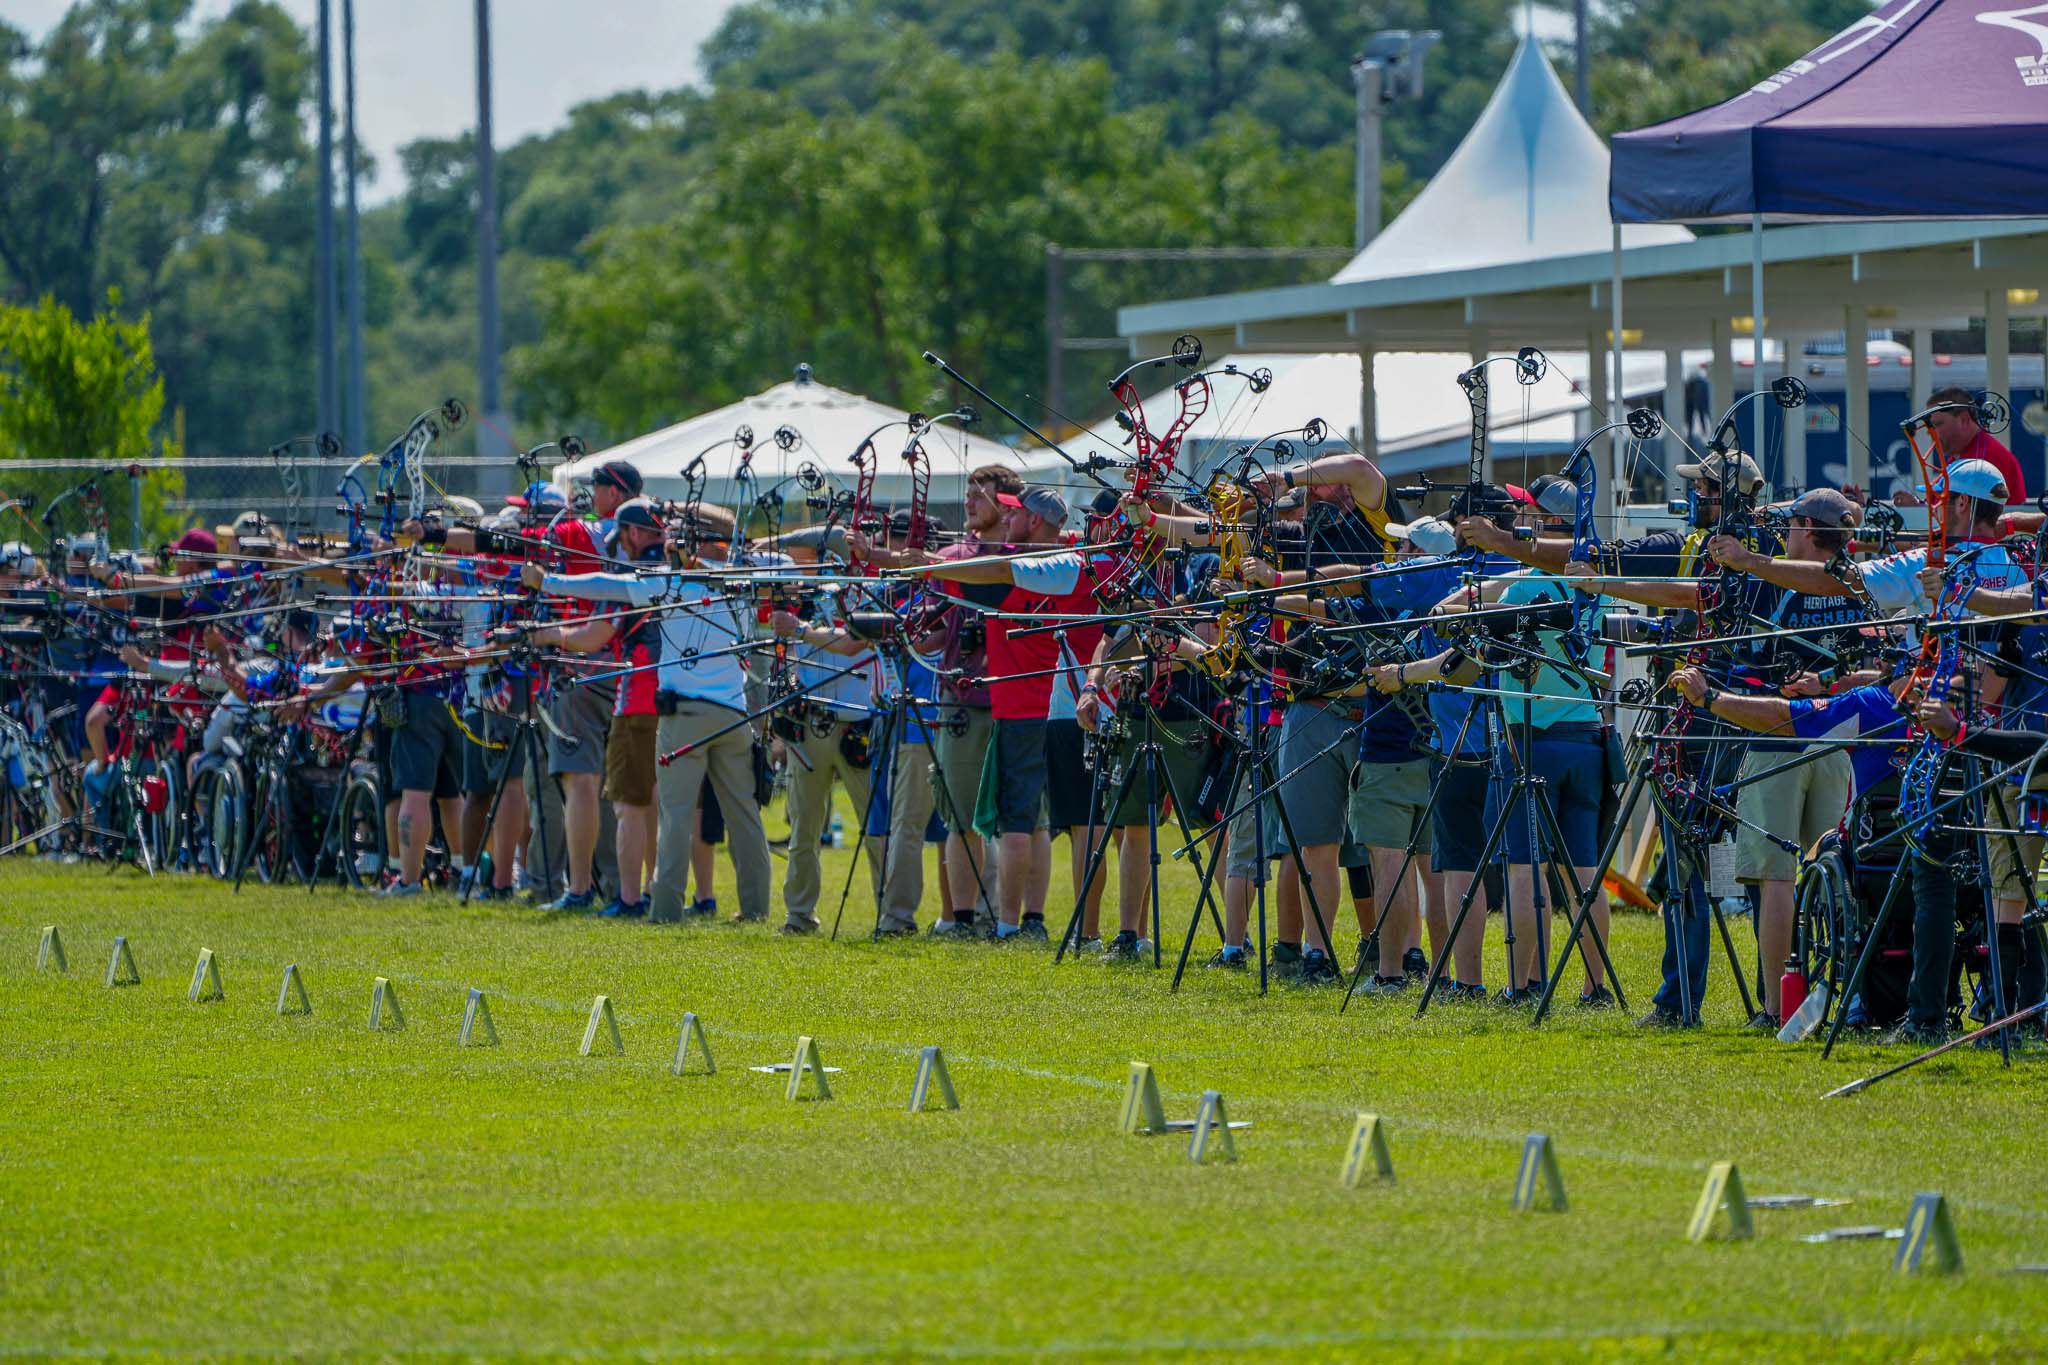 Gator Cup registration is open, with added drama expected for the 15th